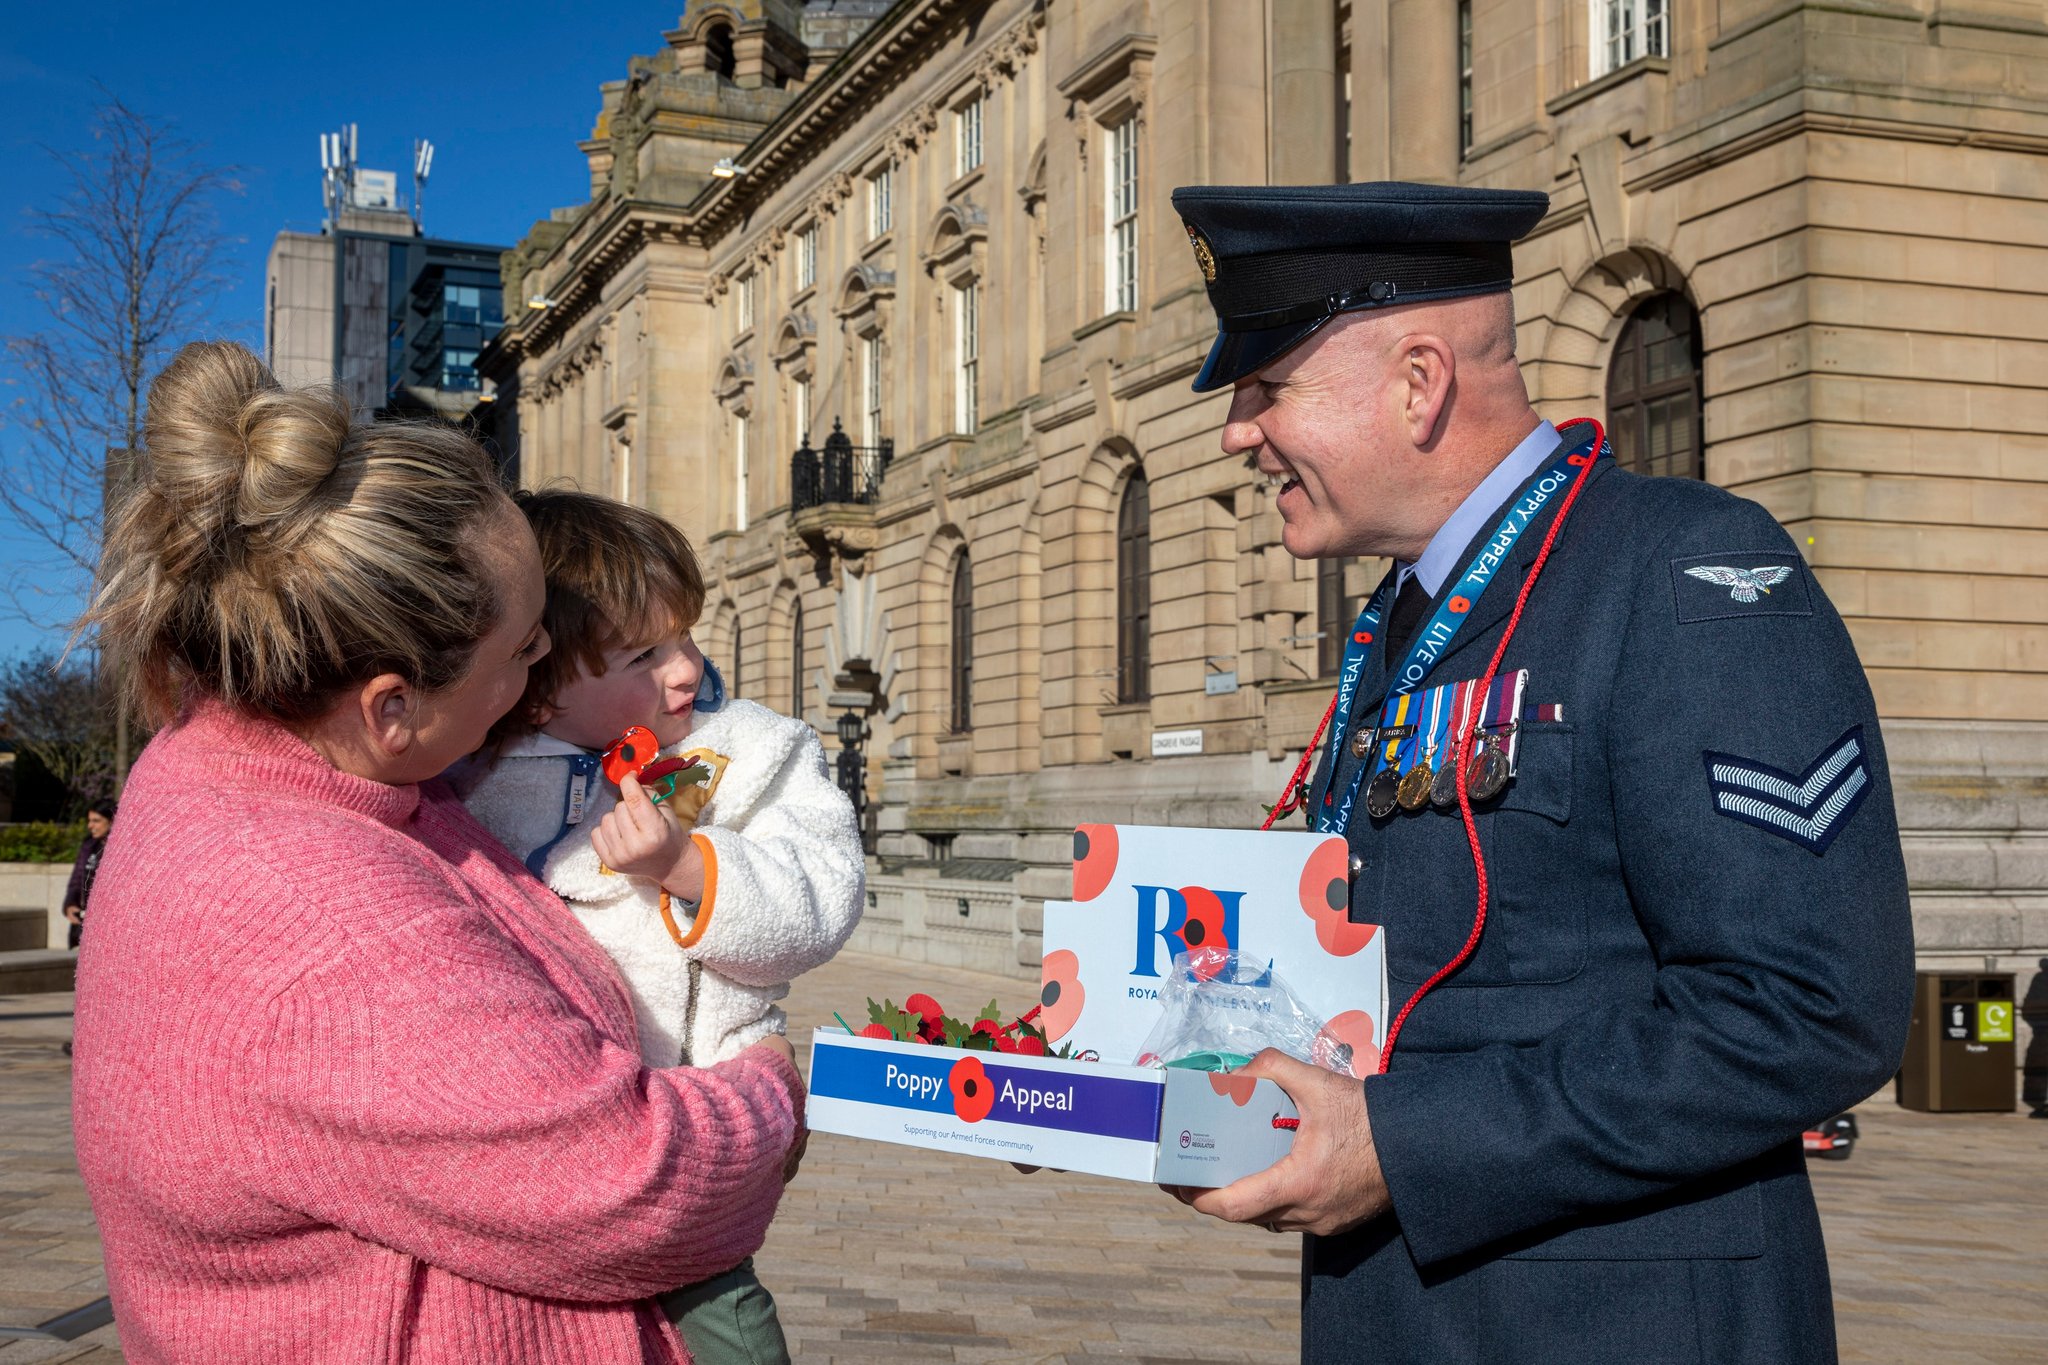 Personnel with Poppy bucket collections, while talking to public. 